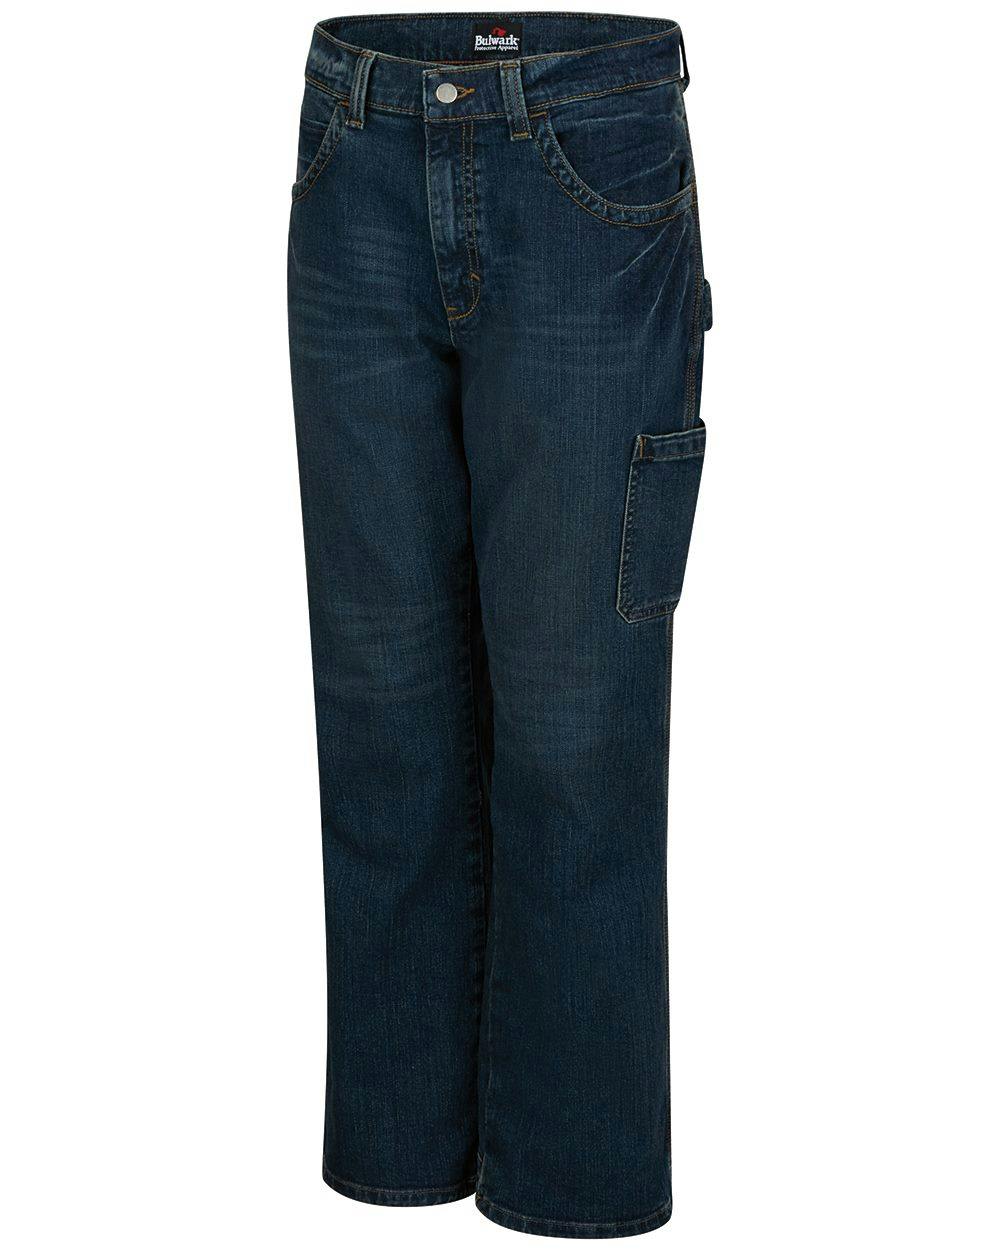 Image for Stretch Denim Dungaree Jeans - PSJ6